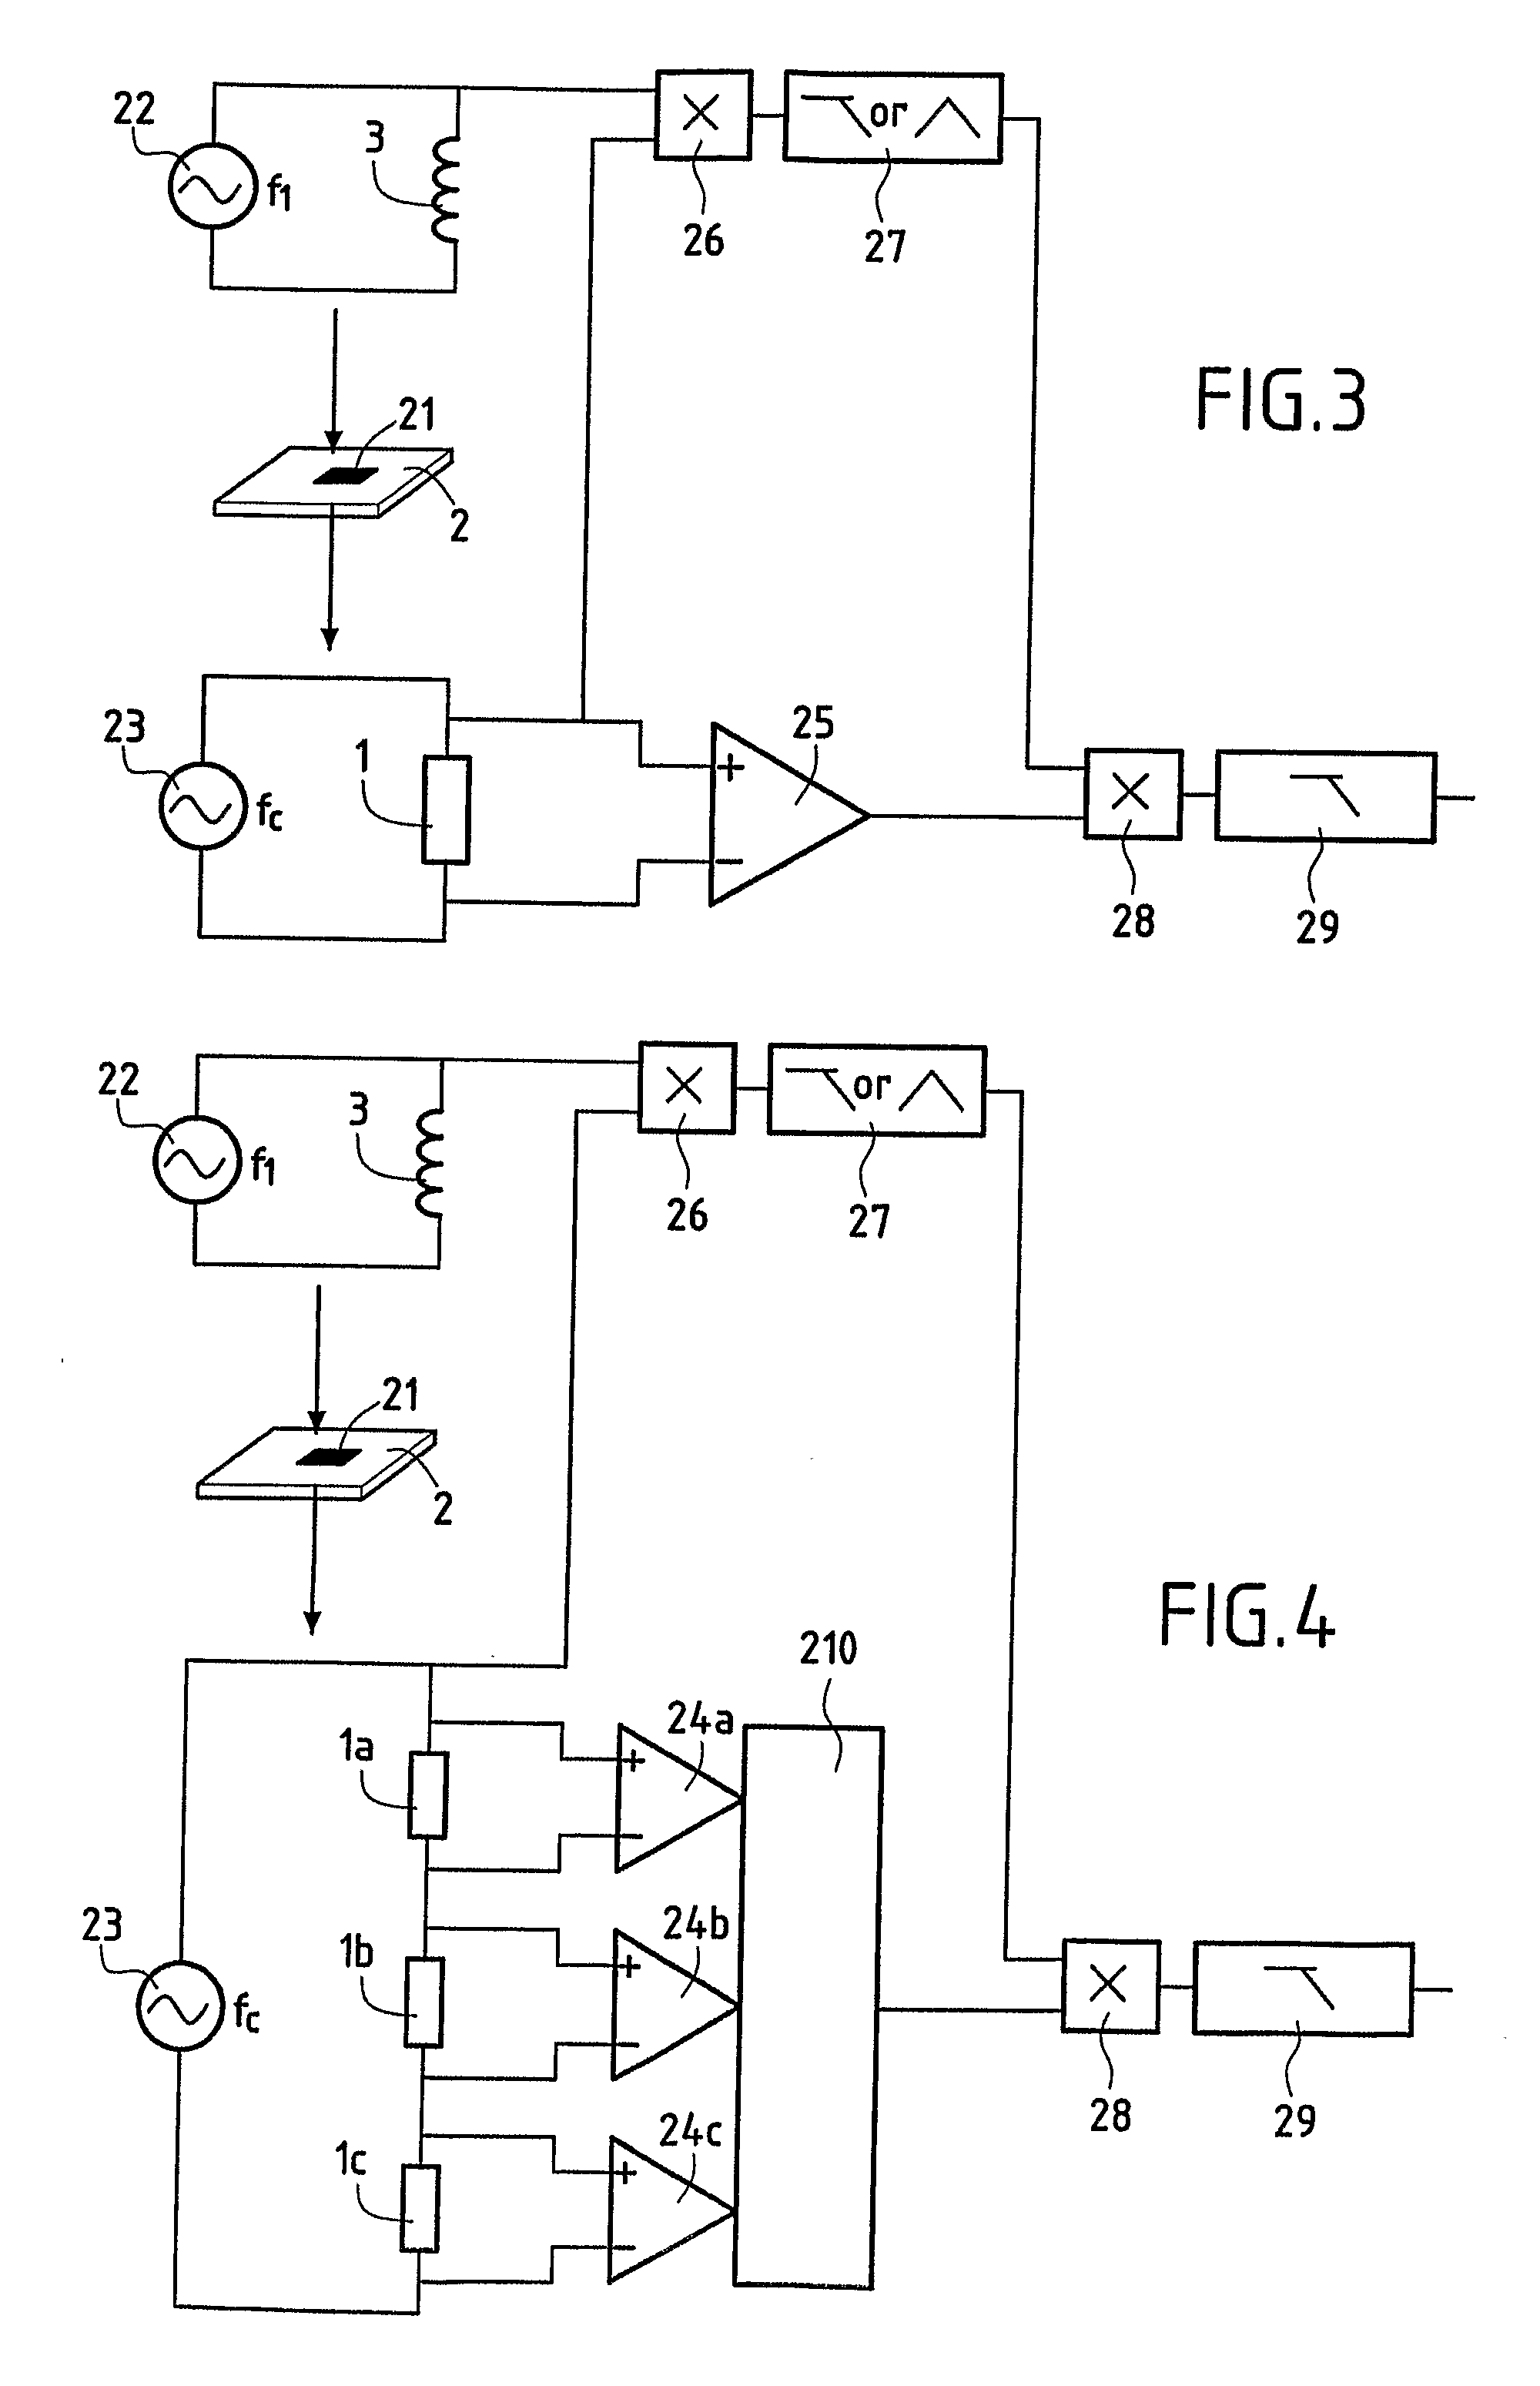 Method and device for non destructive evaluation of defects in a metallic object